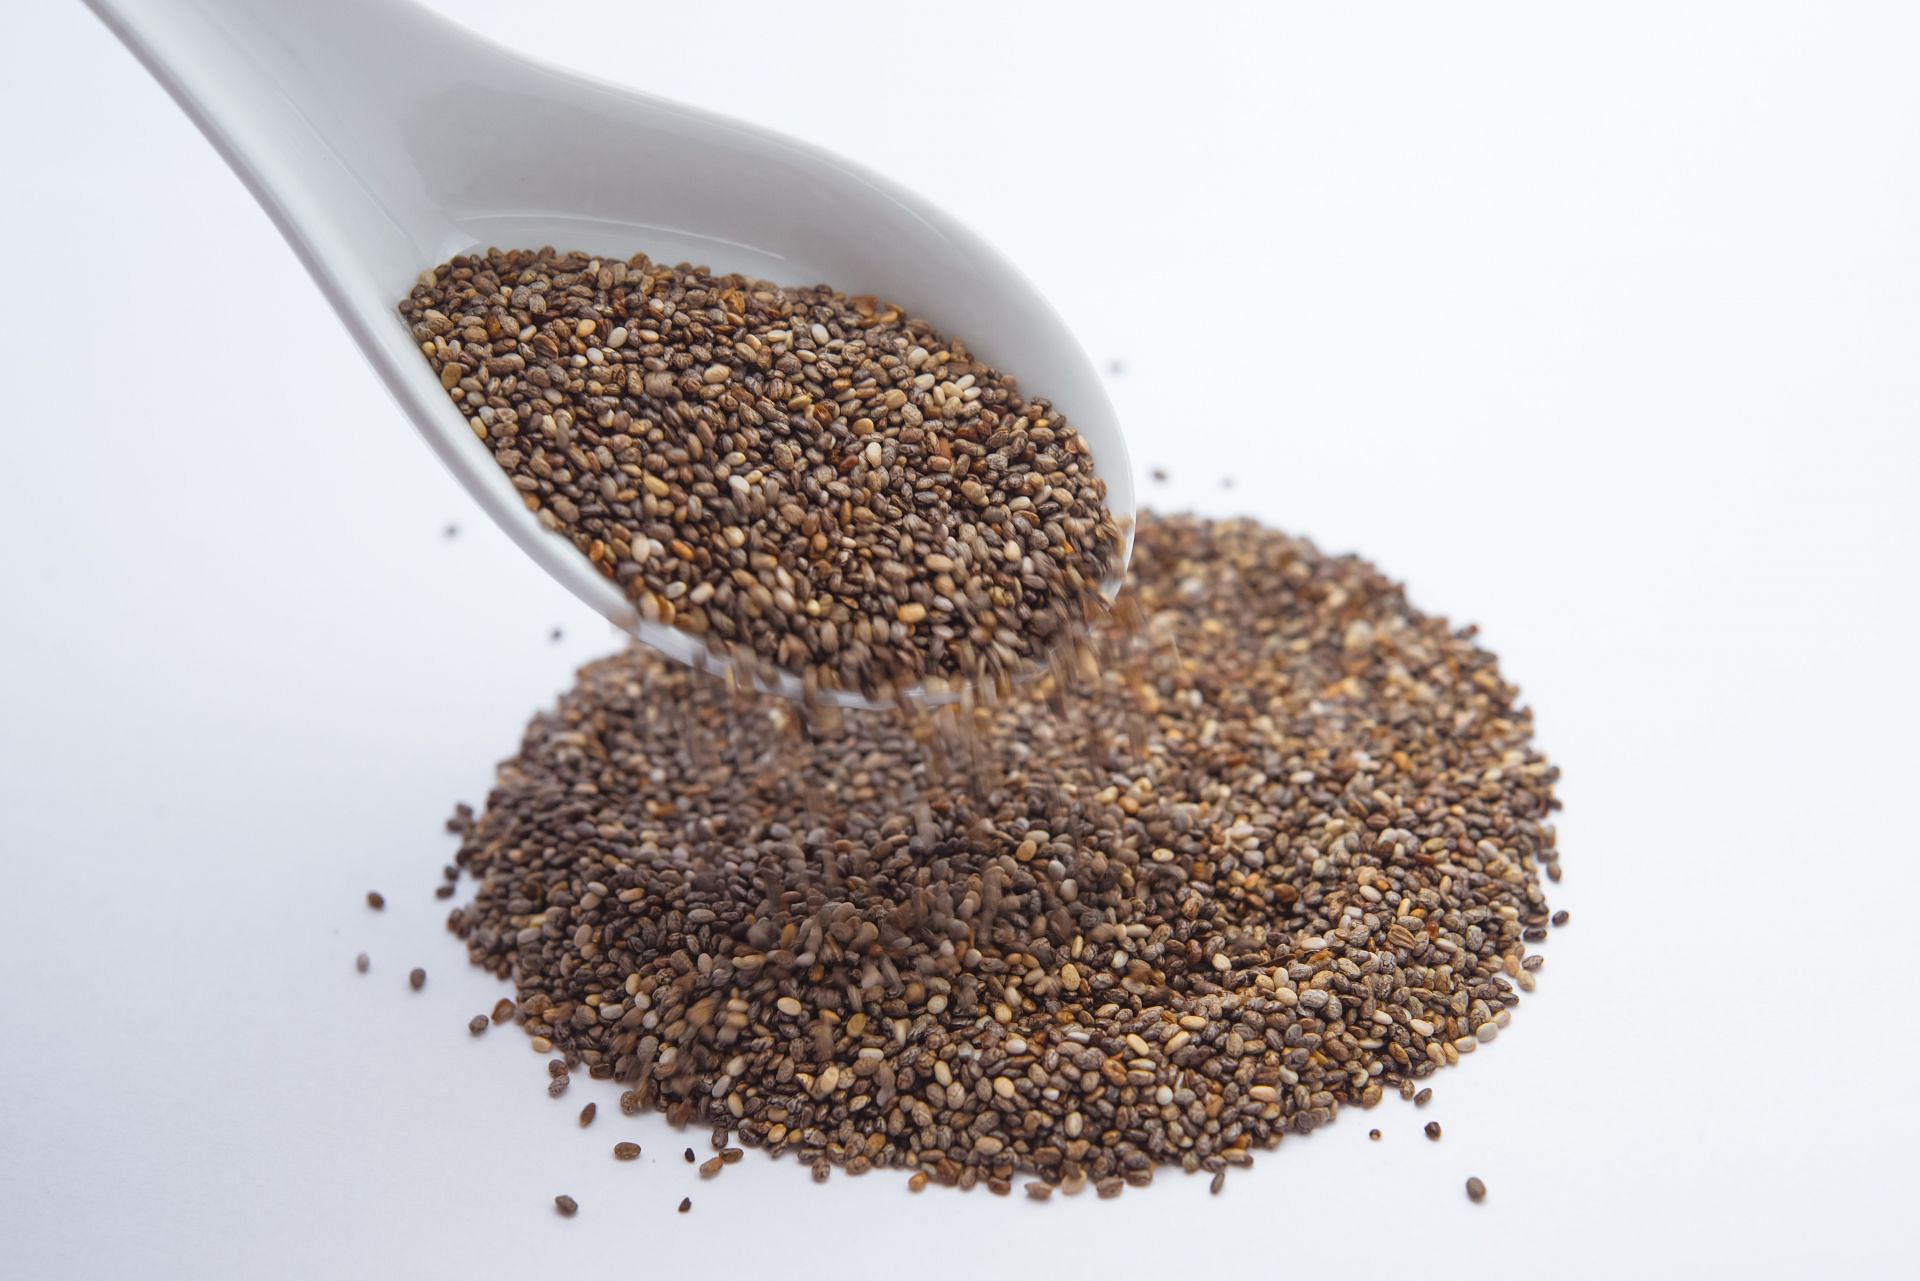 Chia seeds supplements can be included for fiber. (Image via Pexels/Bruno Scramgnon)